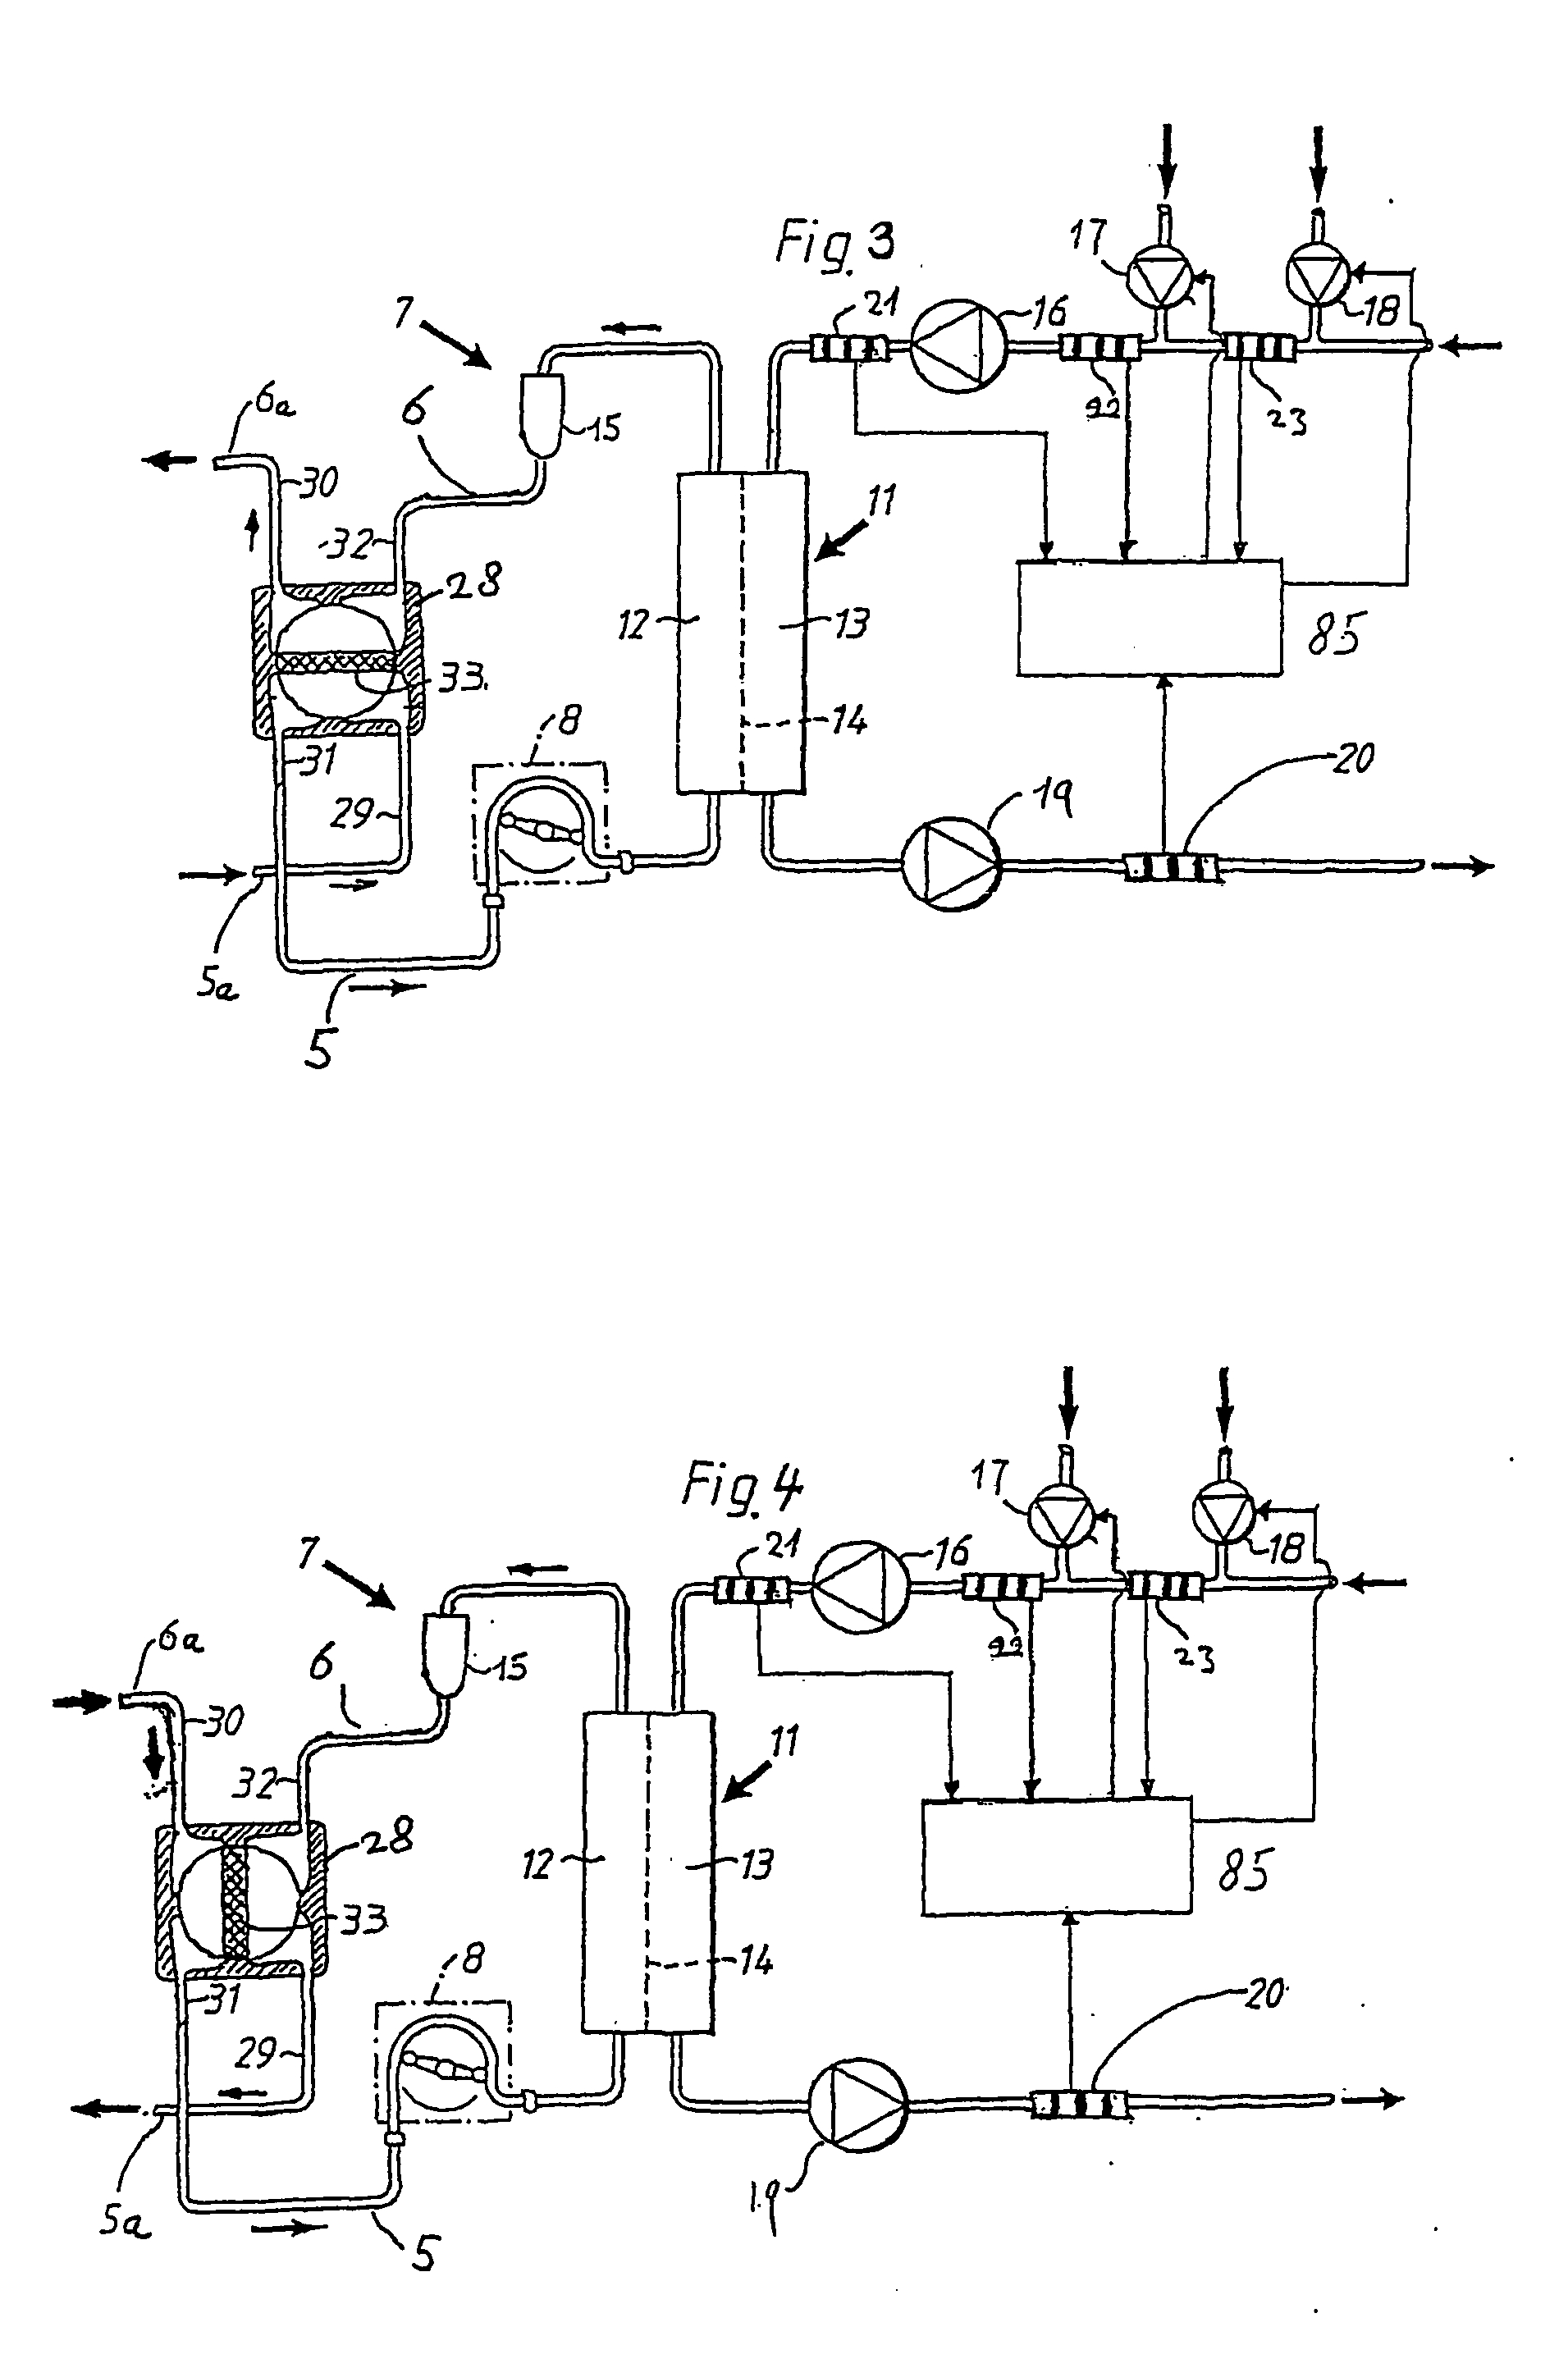 Method and apparatus for determining access flow